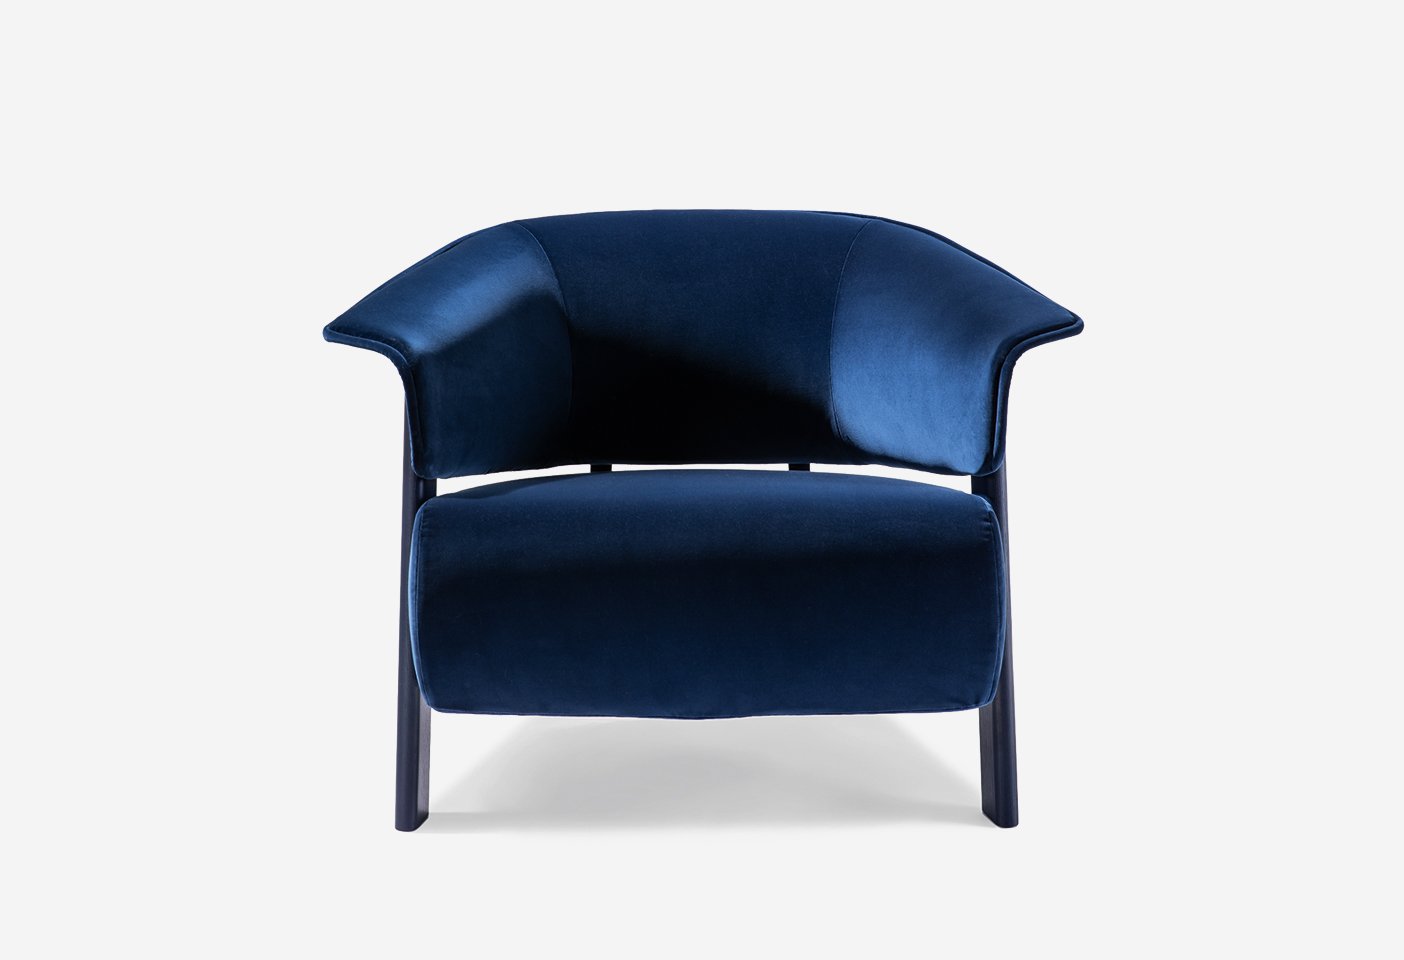 The Back-Wing armchair designed by Patricia Urquiola for Cassina. Photo c/o Cassina.